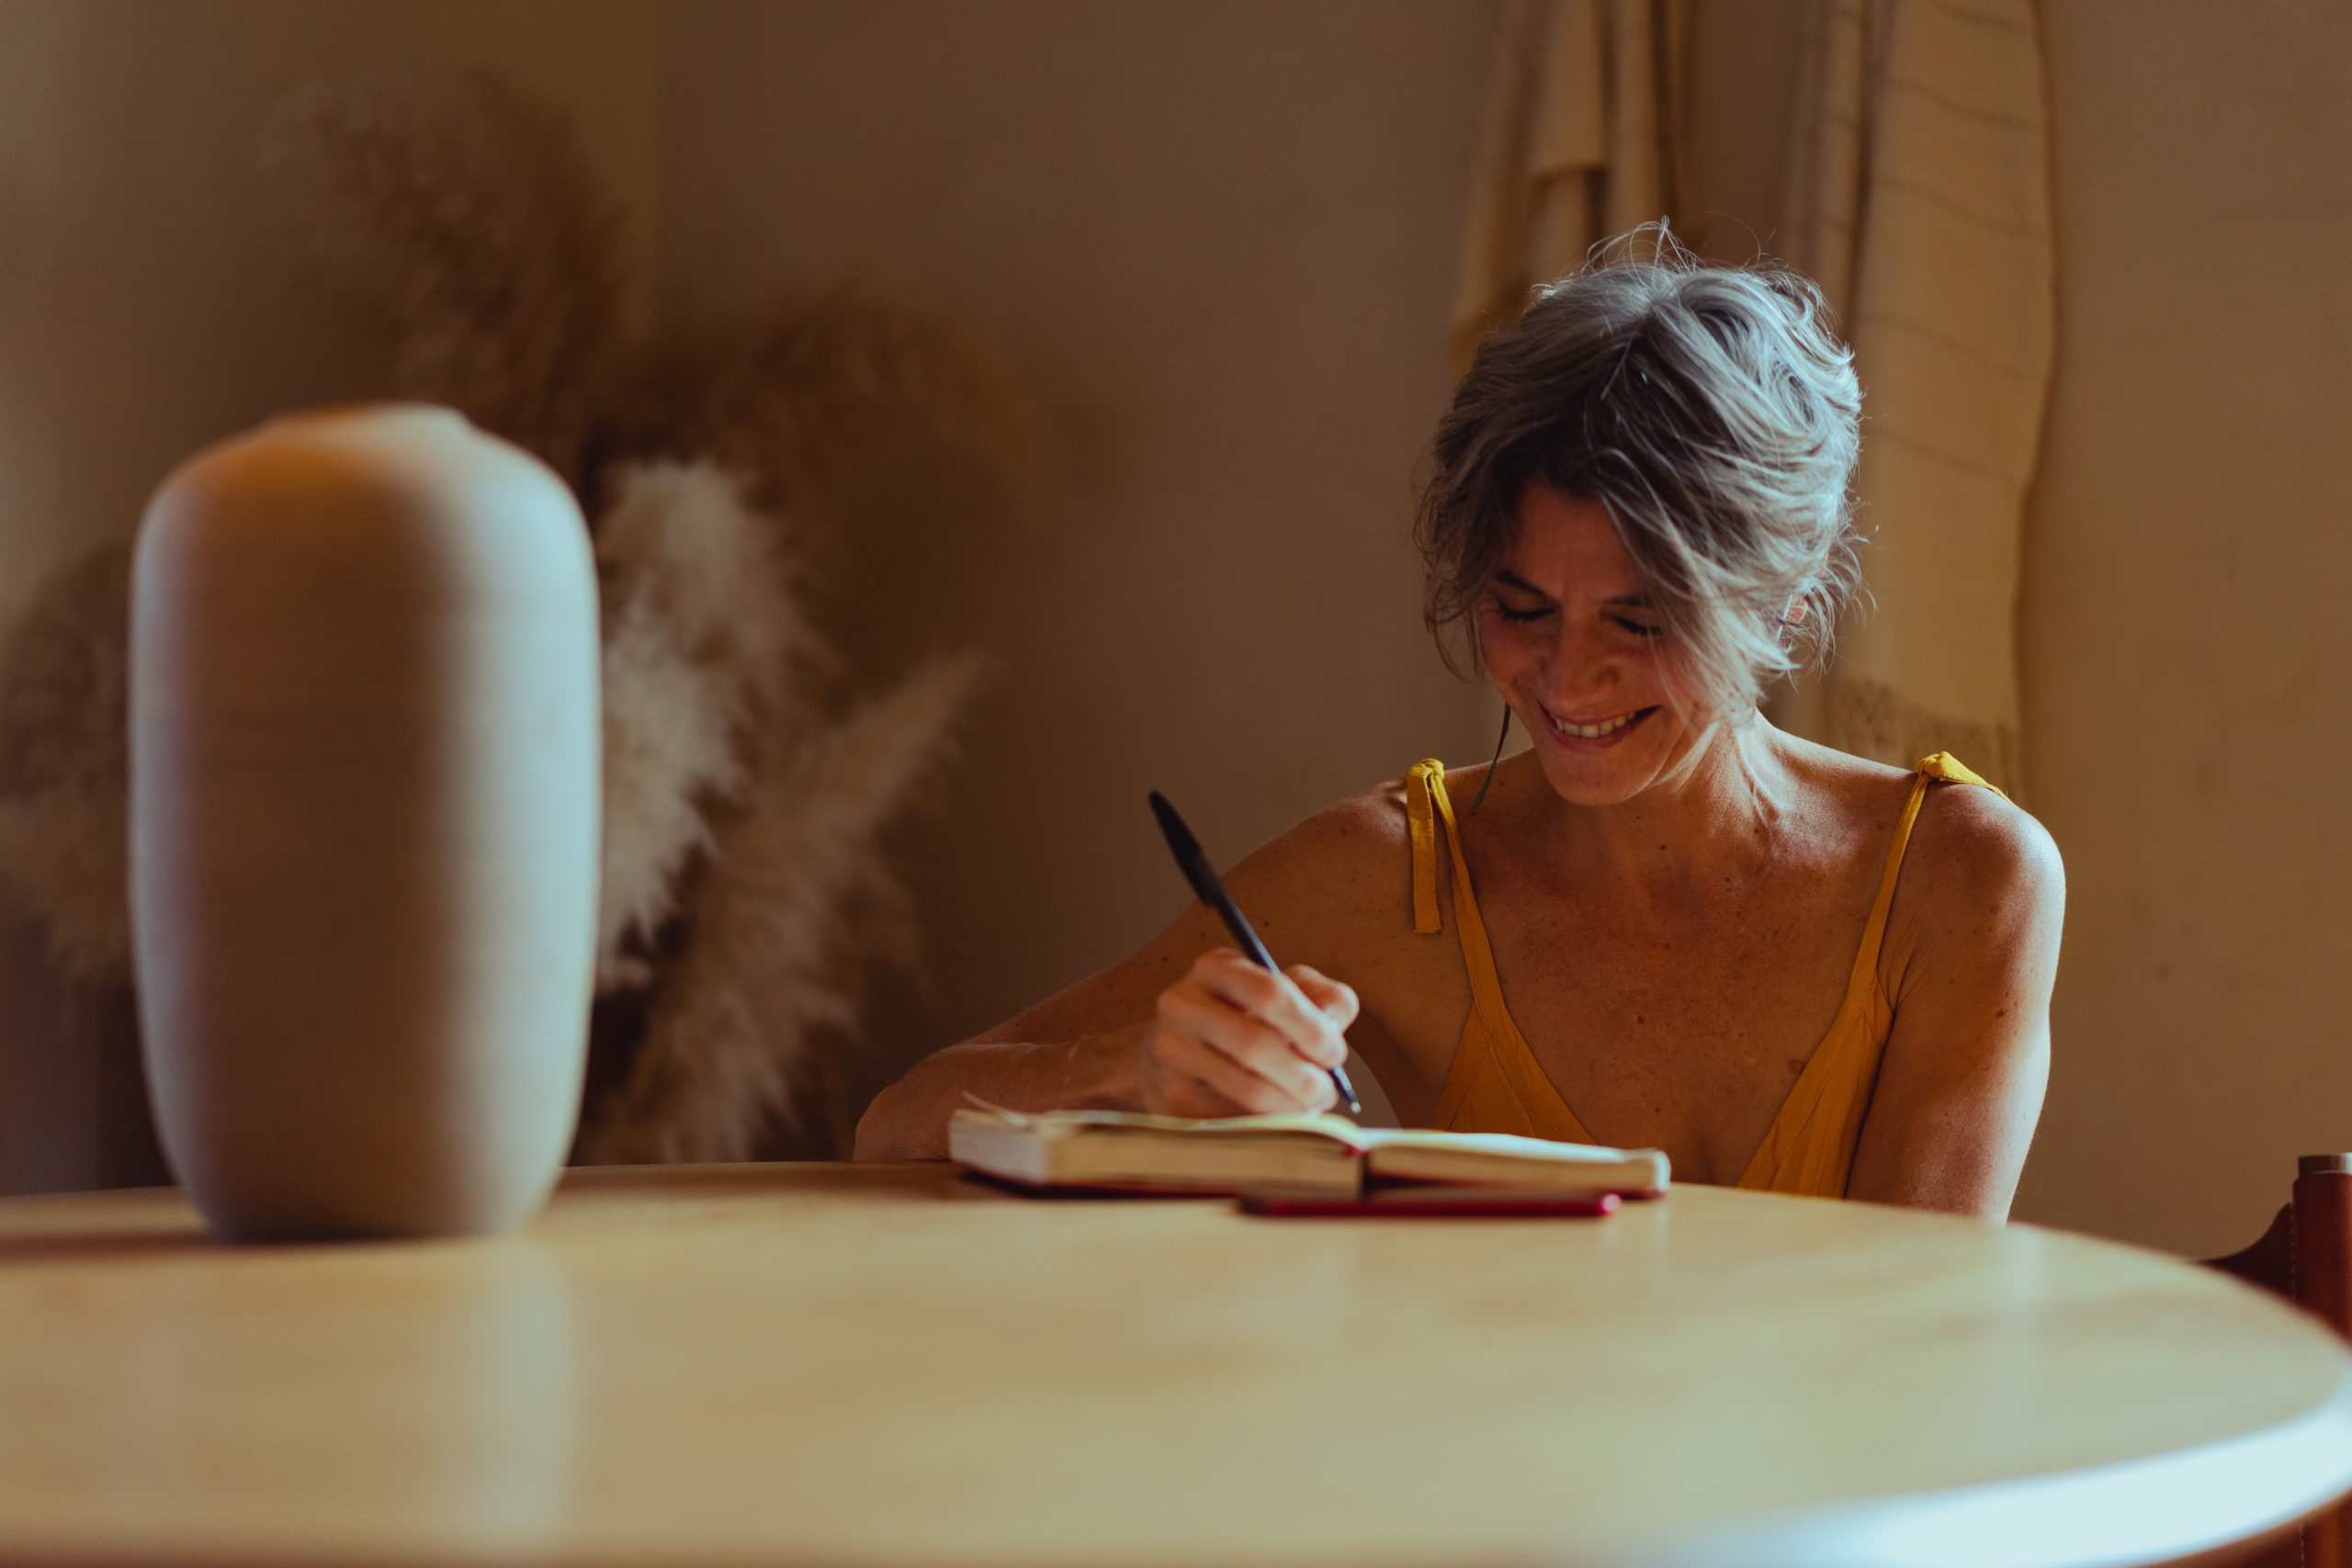 A woman smiles as she writes in her gratitude journal, a good practice for chronic illness acceptance.